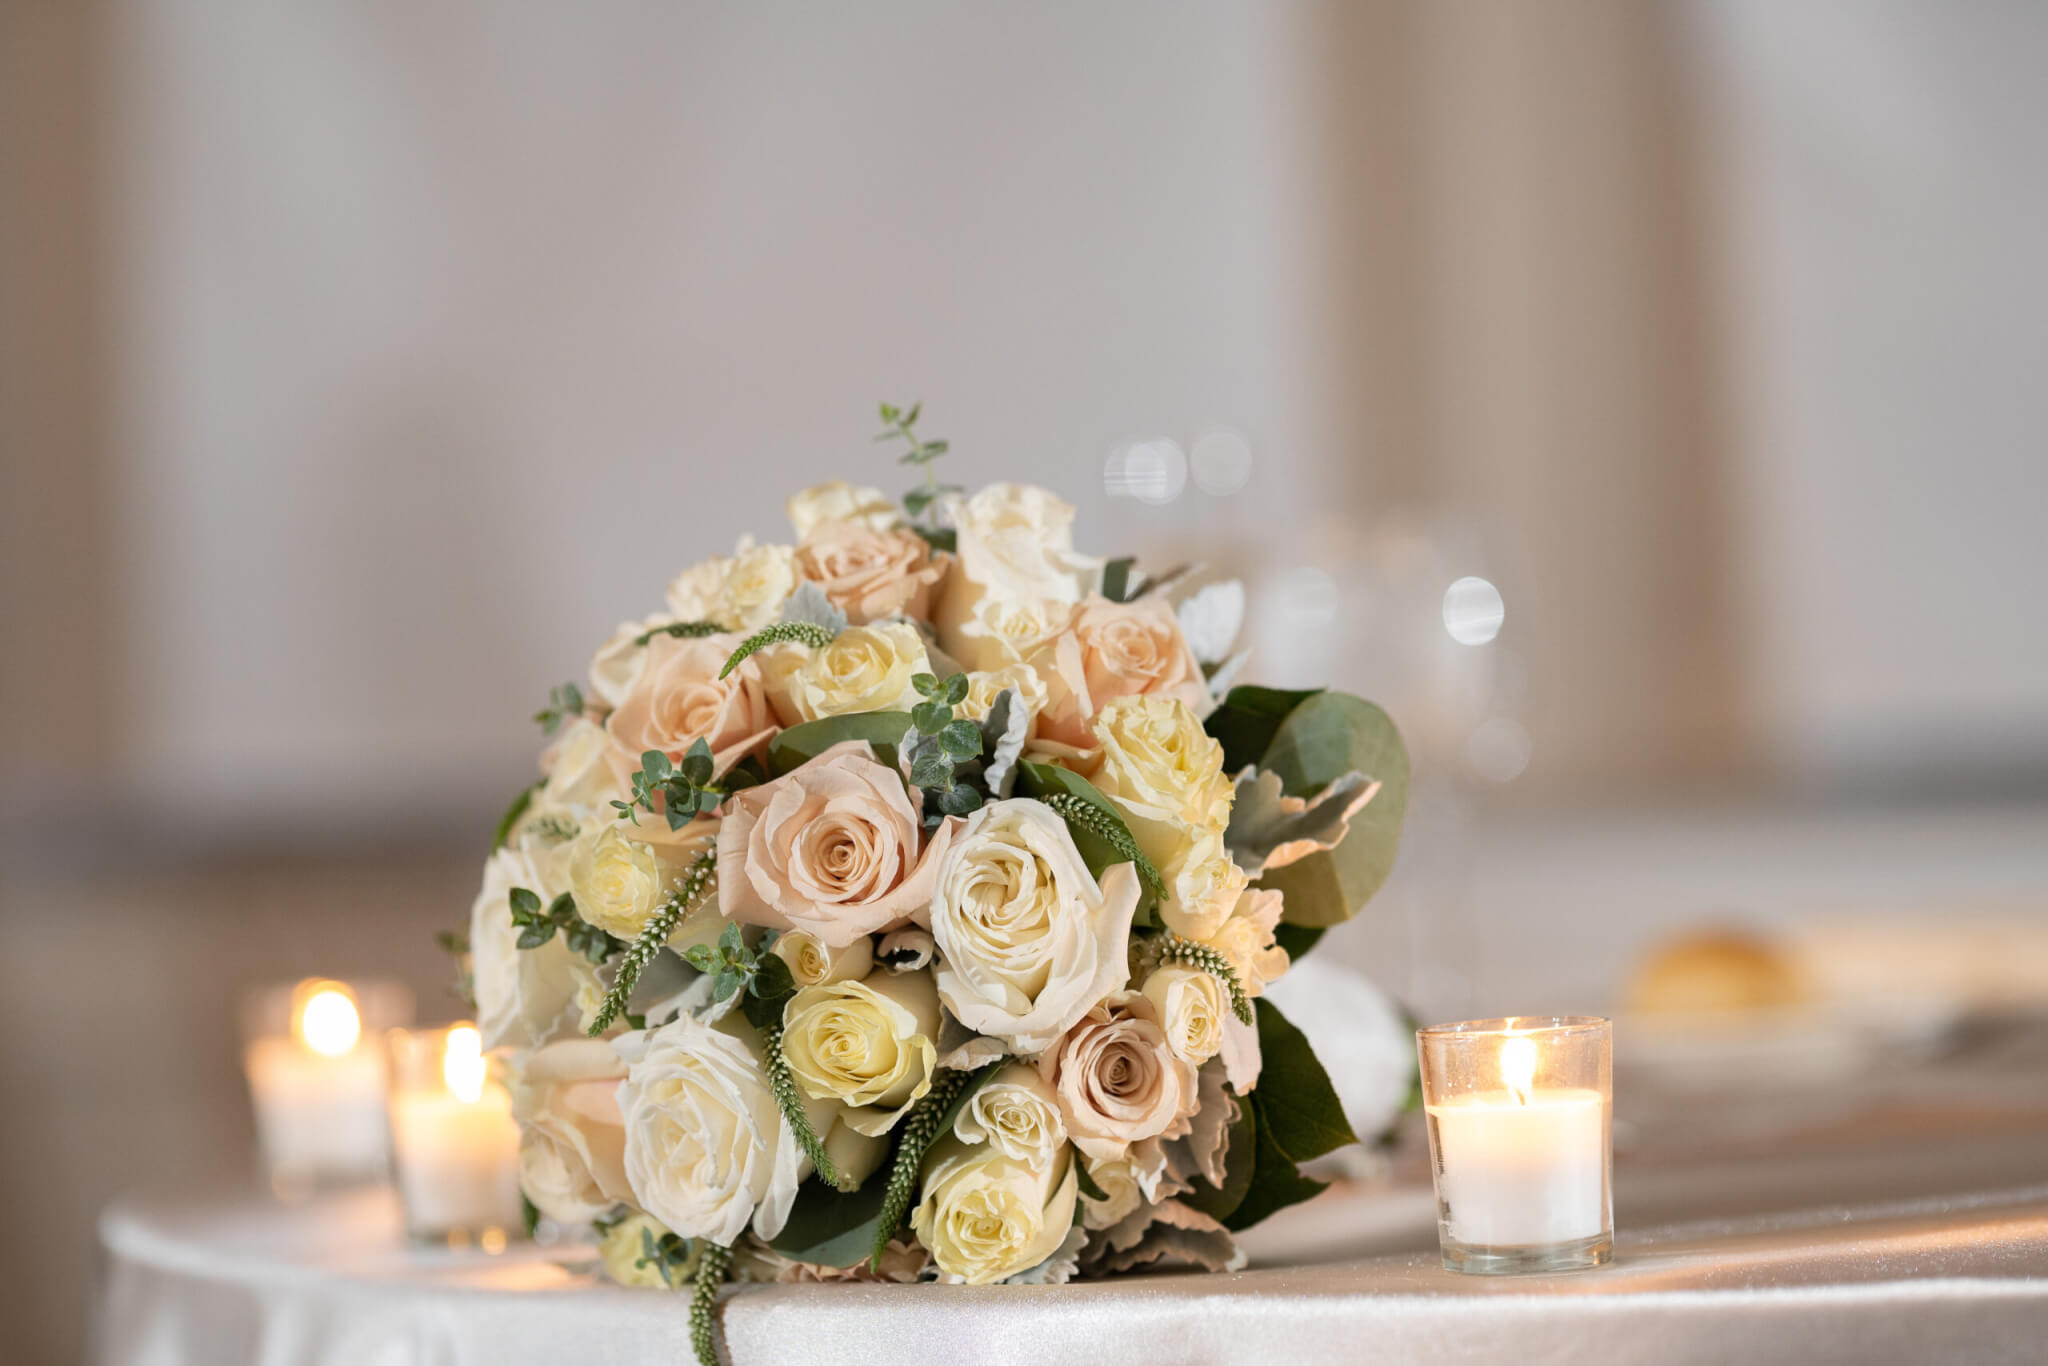 19 Questions to Ask When Choosing a Wedding Florist